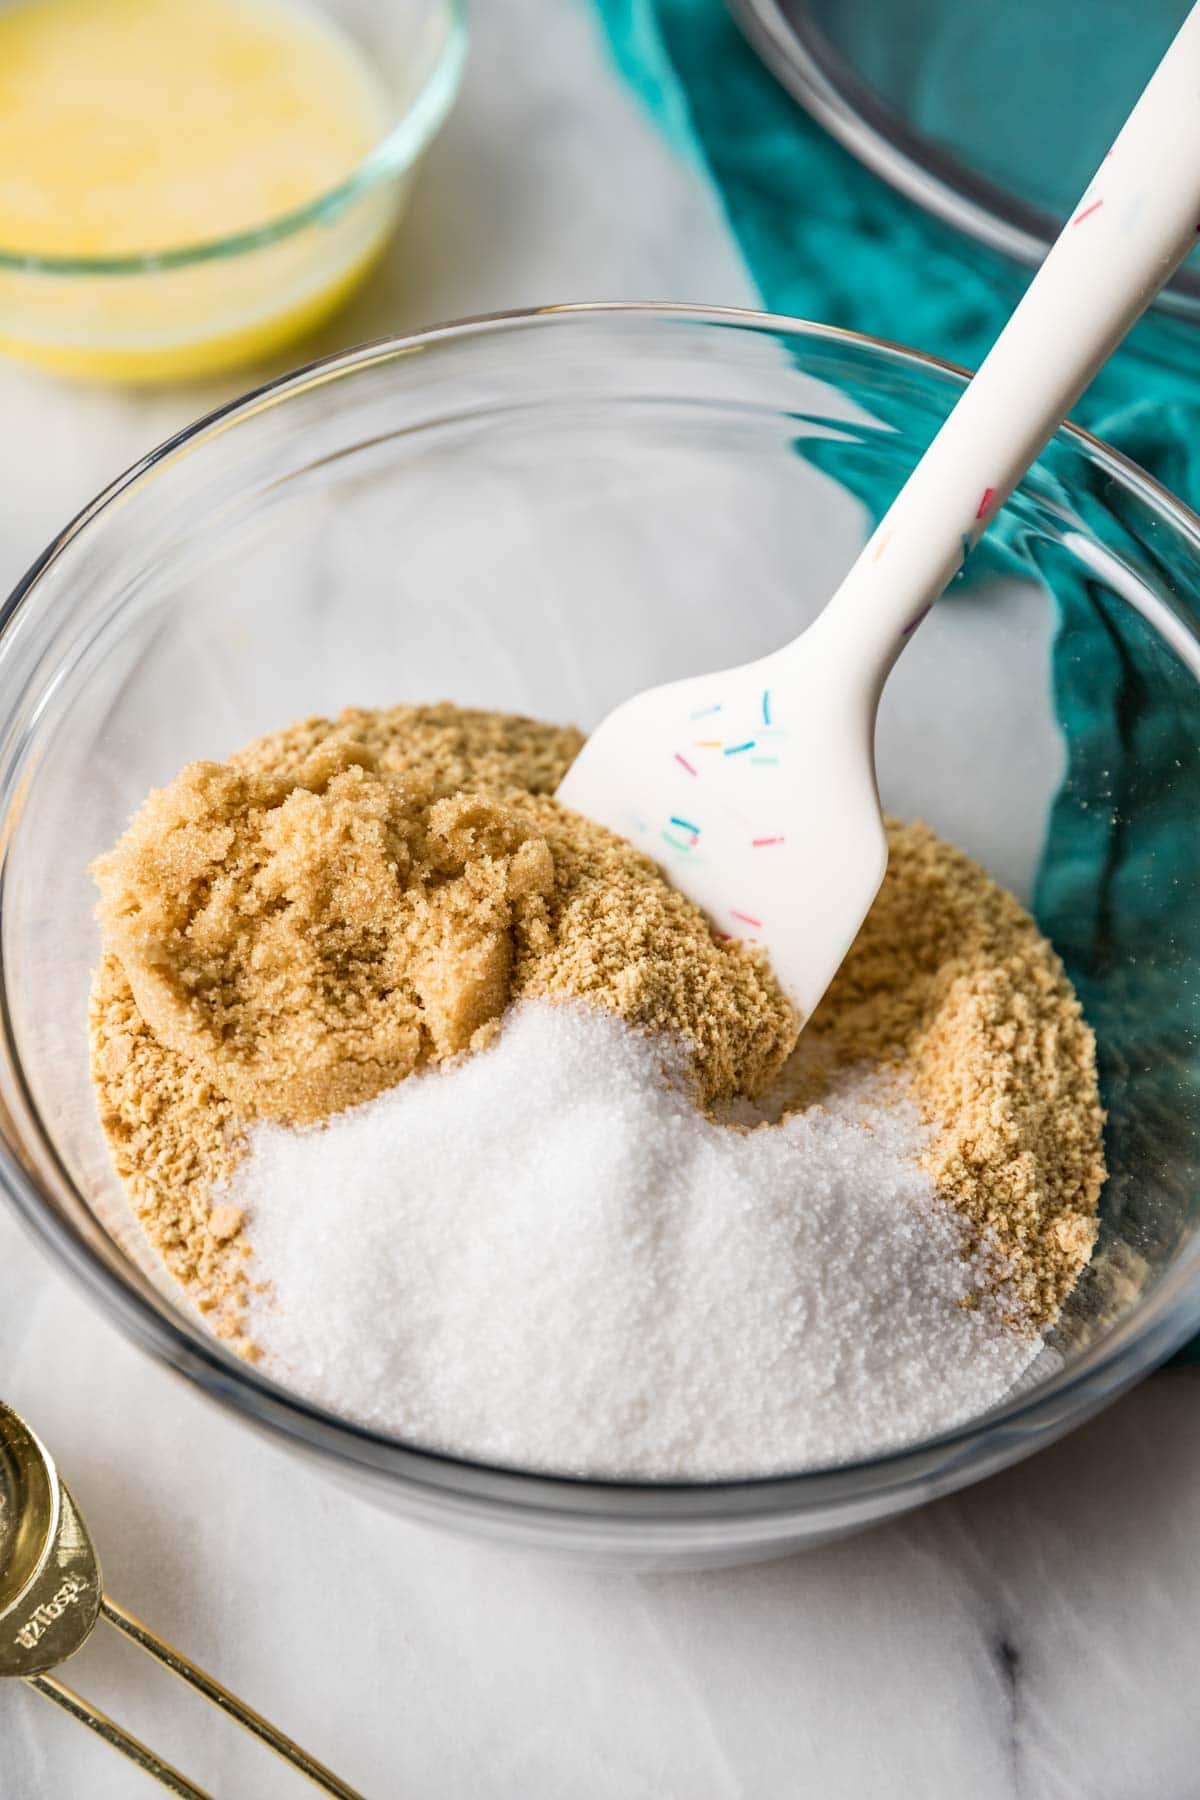 Graham cracker crumbs and sugar being stirred together with a spatula.